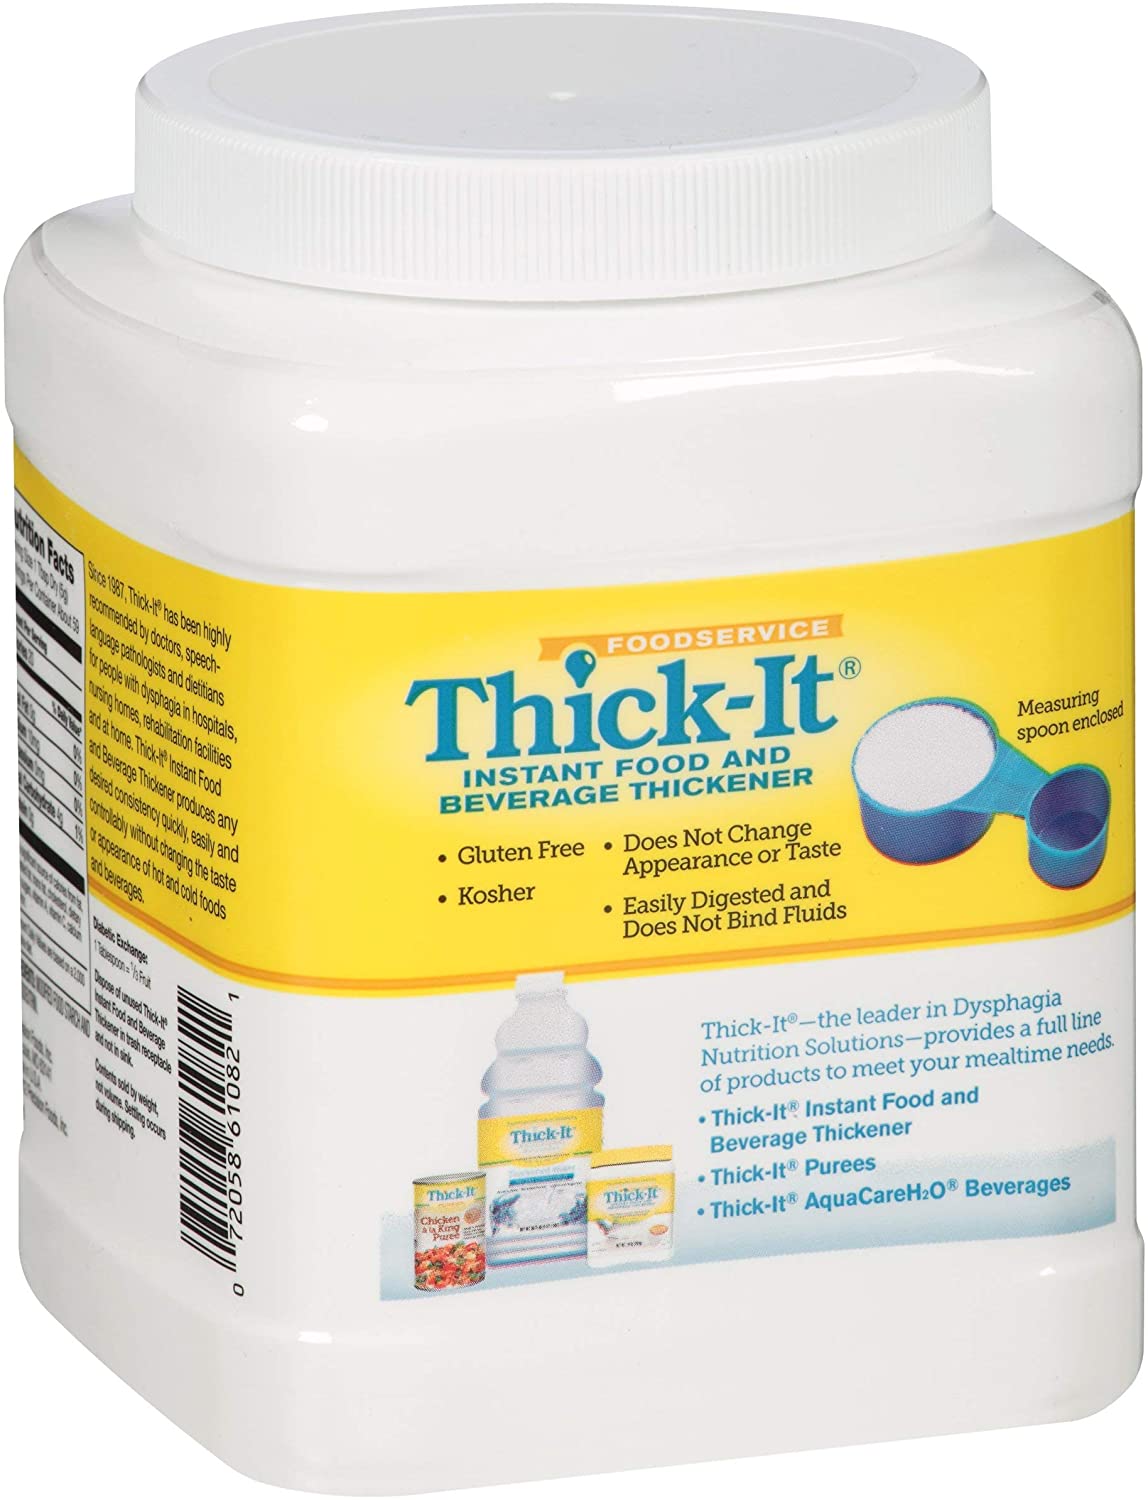 Kent Precision Foods Thick-It Original J588-H5800 - Food and Beverage Thickener, Unflavored Powder, Canister - 10 oz., One Canister